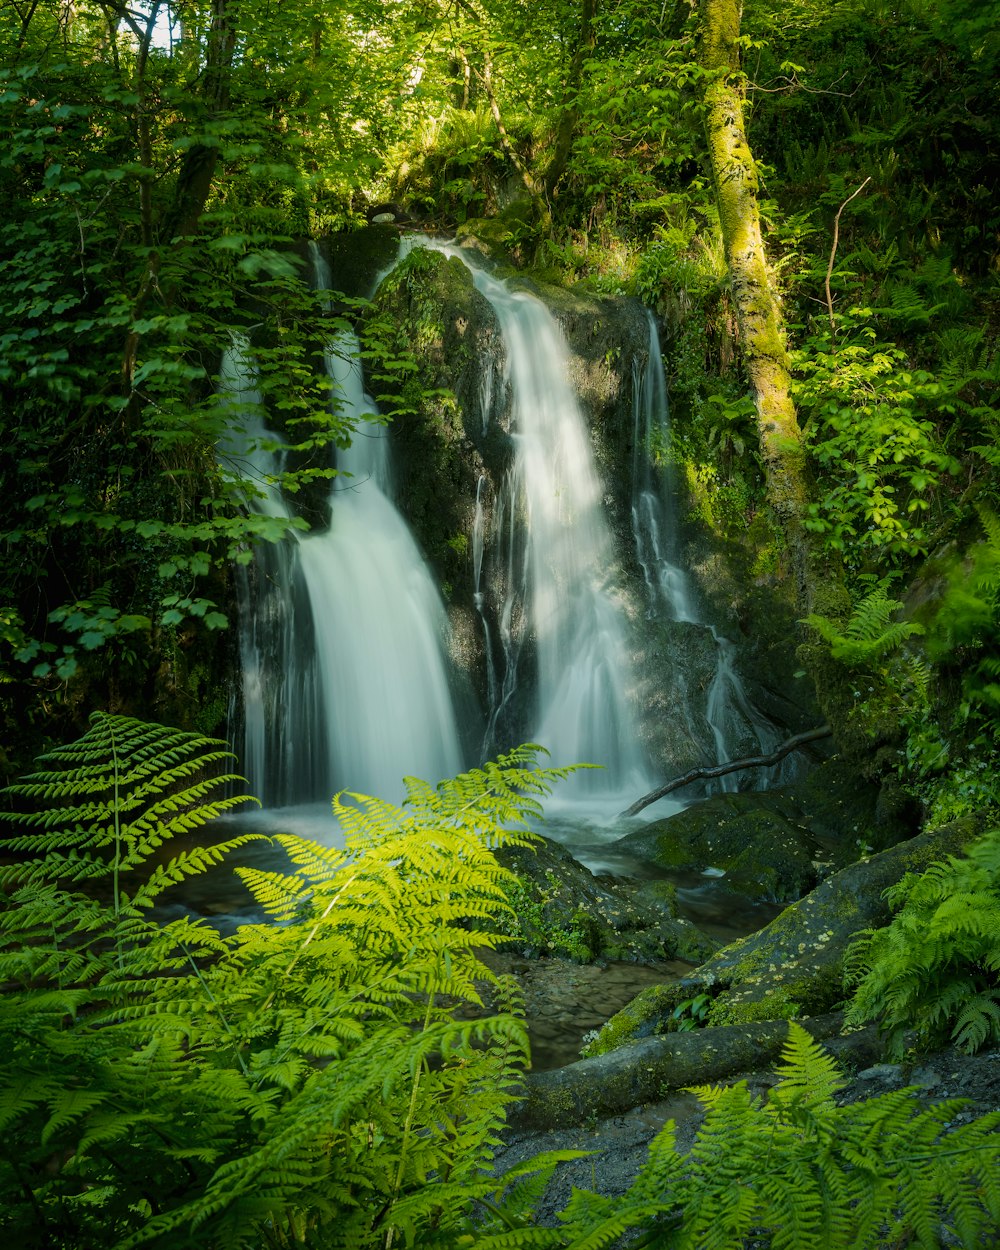 water falls in the middle of green moss covered rocks